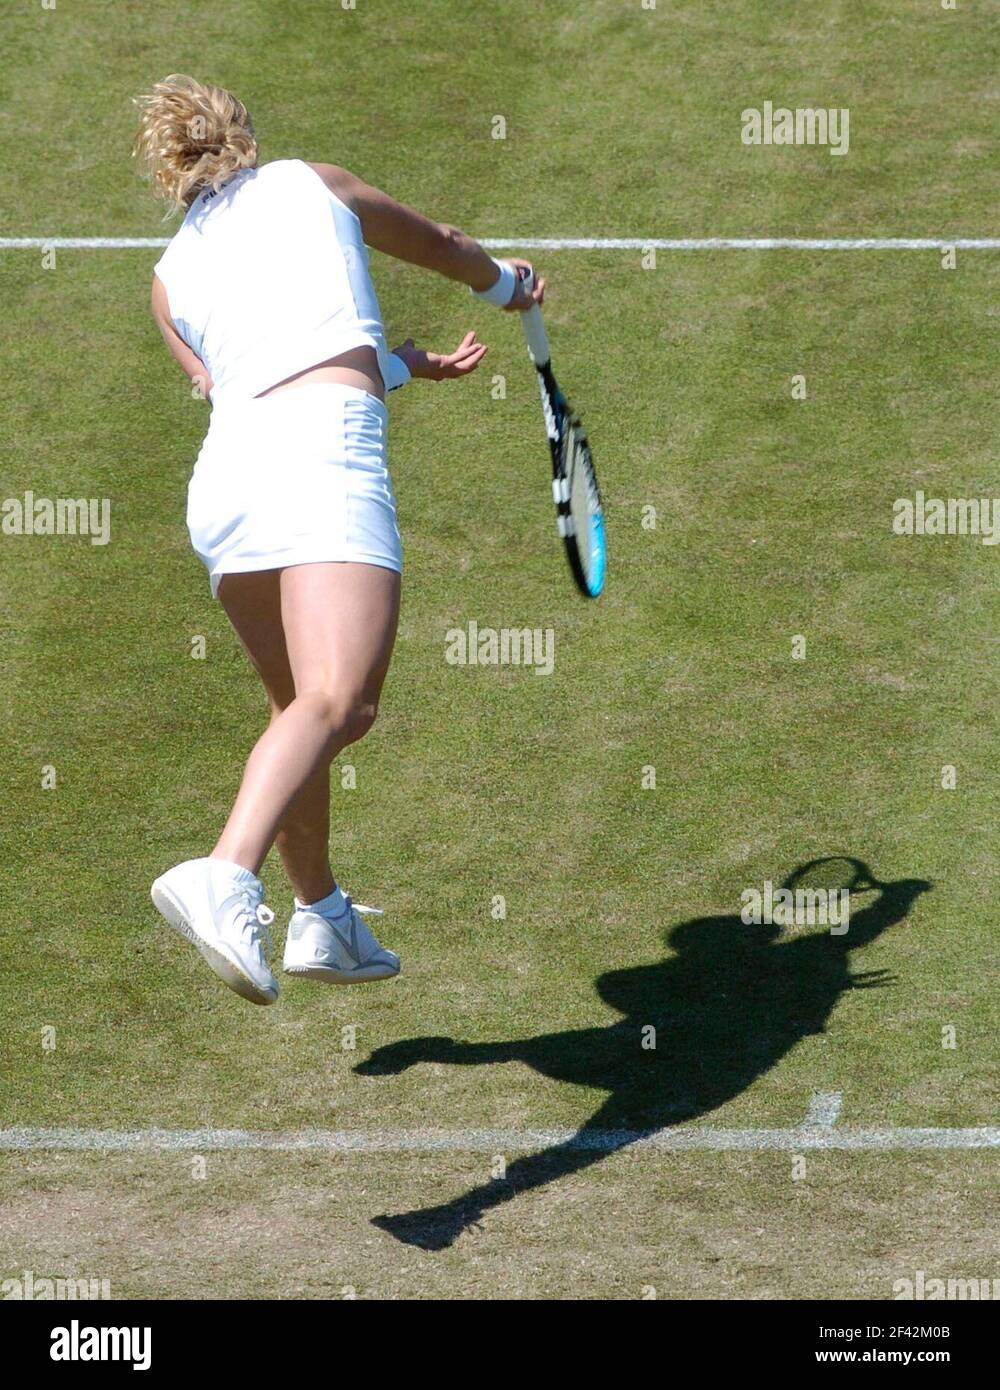 HASTINGS DIRECT TENNIS CHAMPIONSHIPS AT DEVEONSHIRE PARK EASTBOURNE KIM  CLIJSTERS DURING HER MATCH WITH JELENA JANKOVIC 14/6/2005 PICTURE DAVID  ASHDOWNTENNIS Stock Photo - Alamy